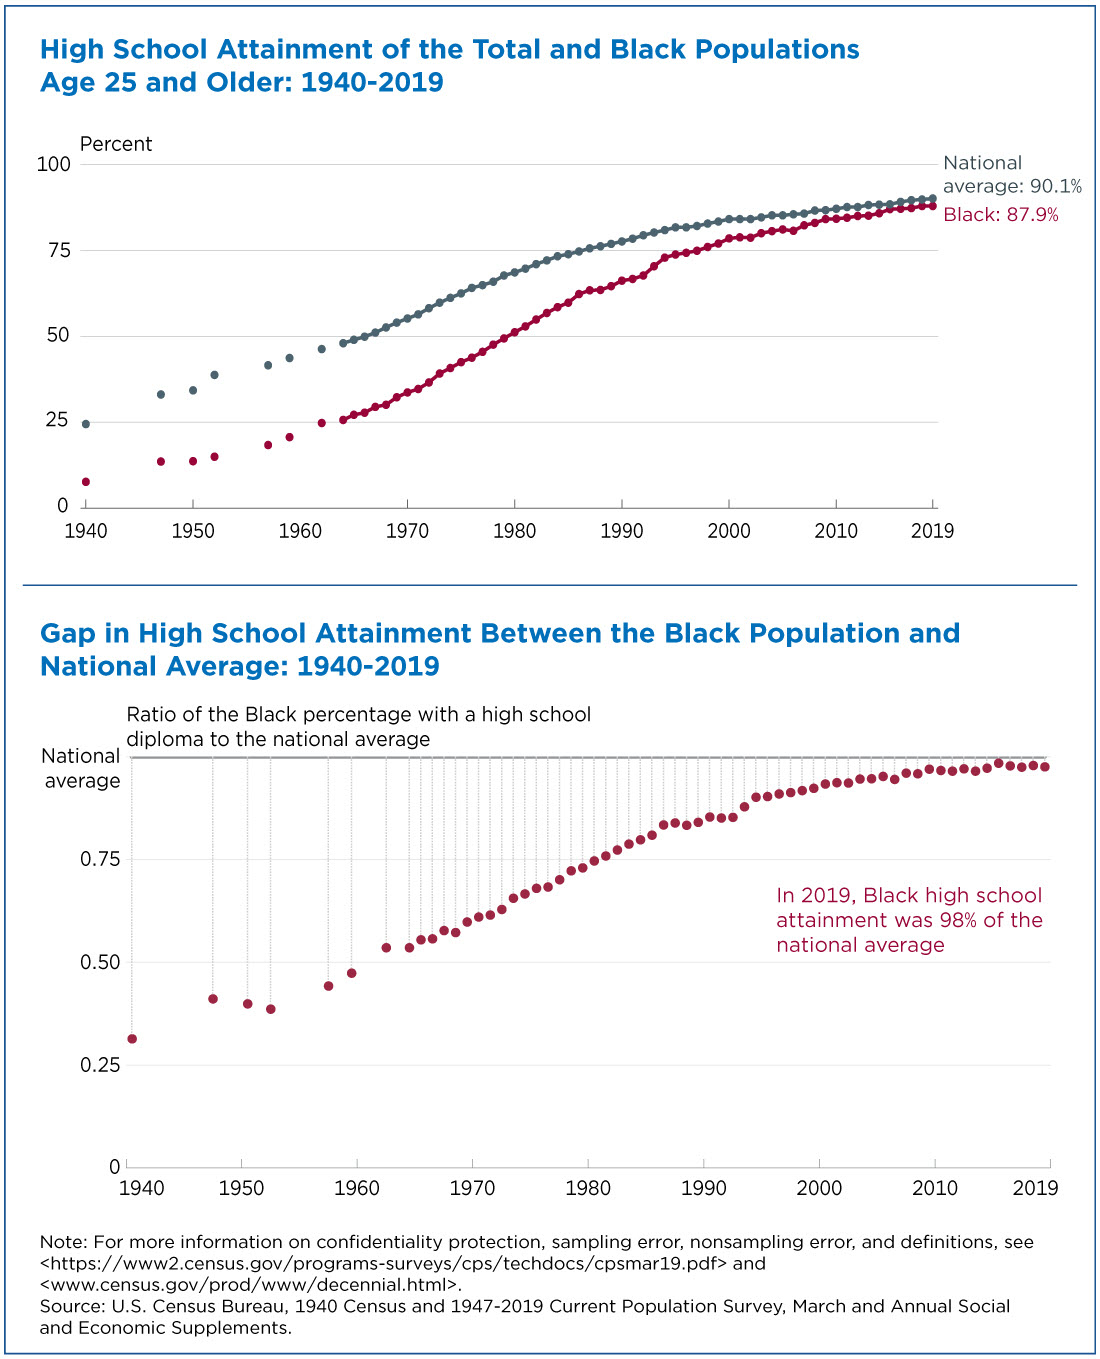 What's Going on With Black High School Graduation Rates?